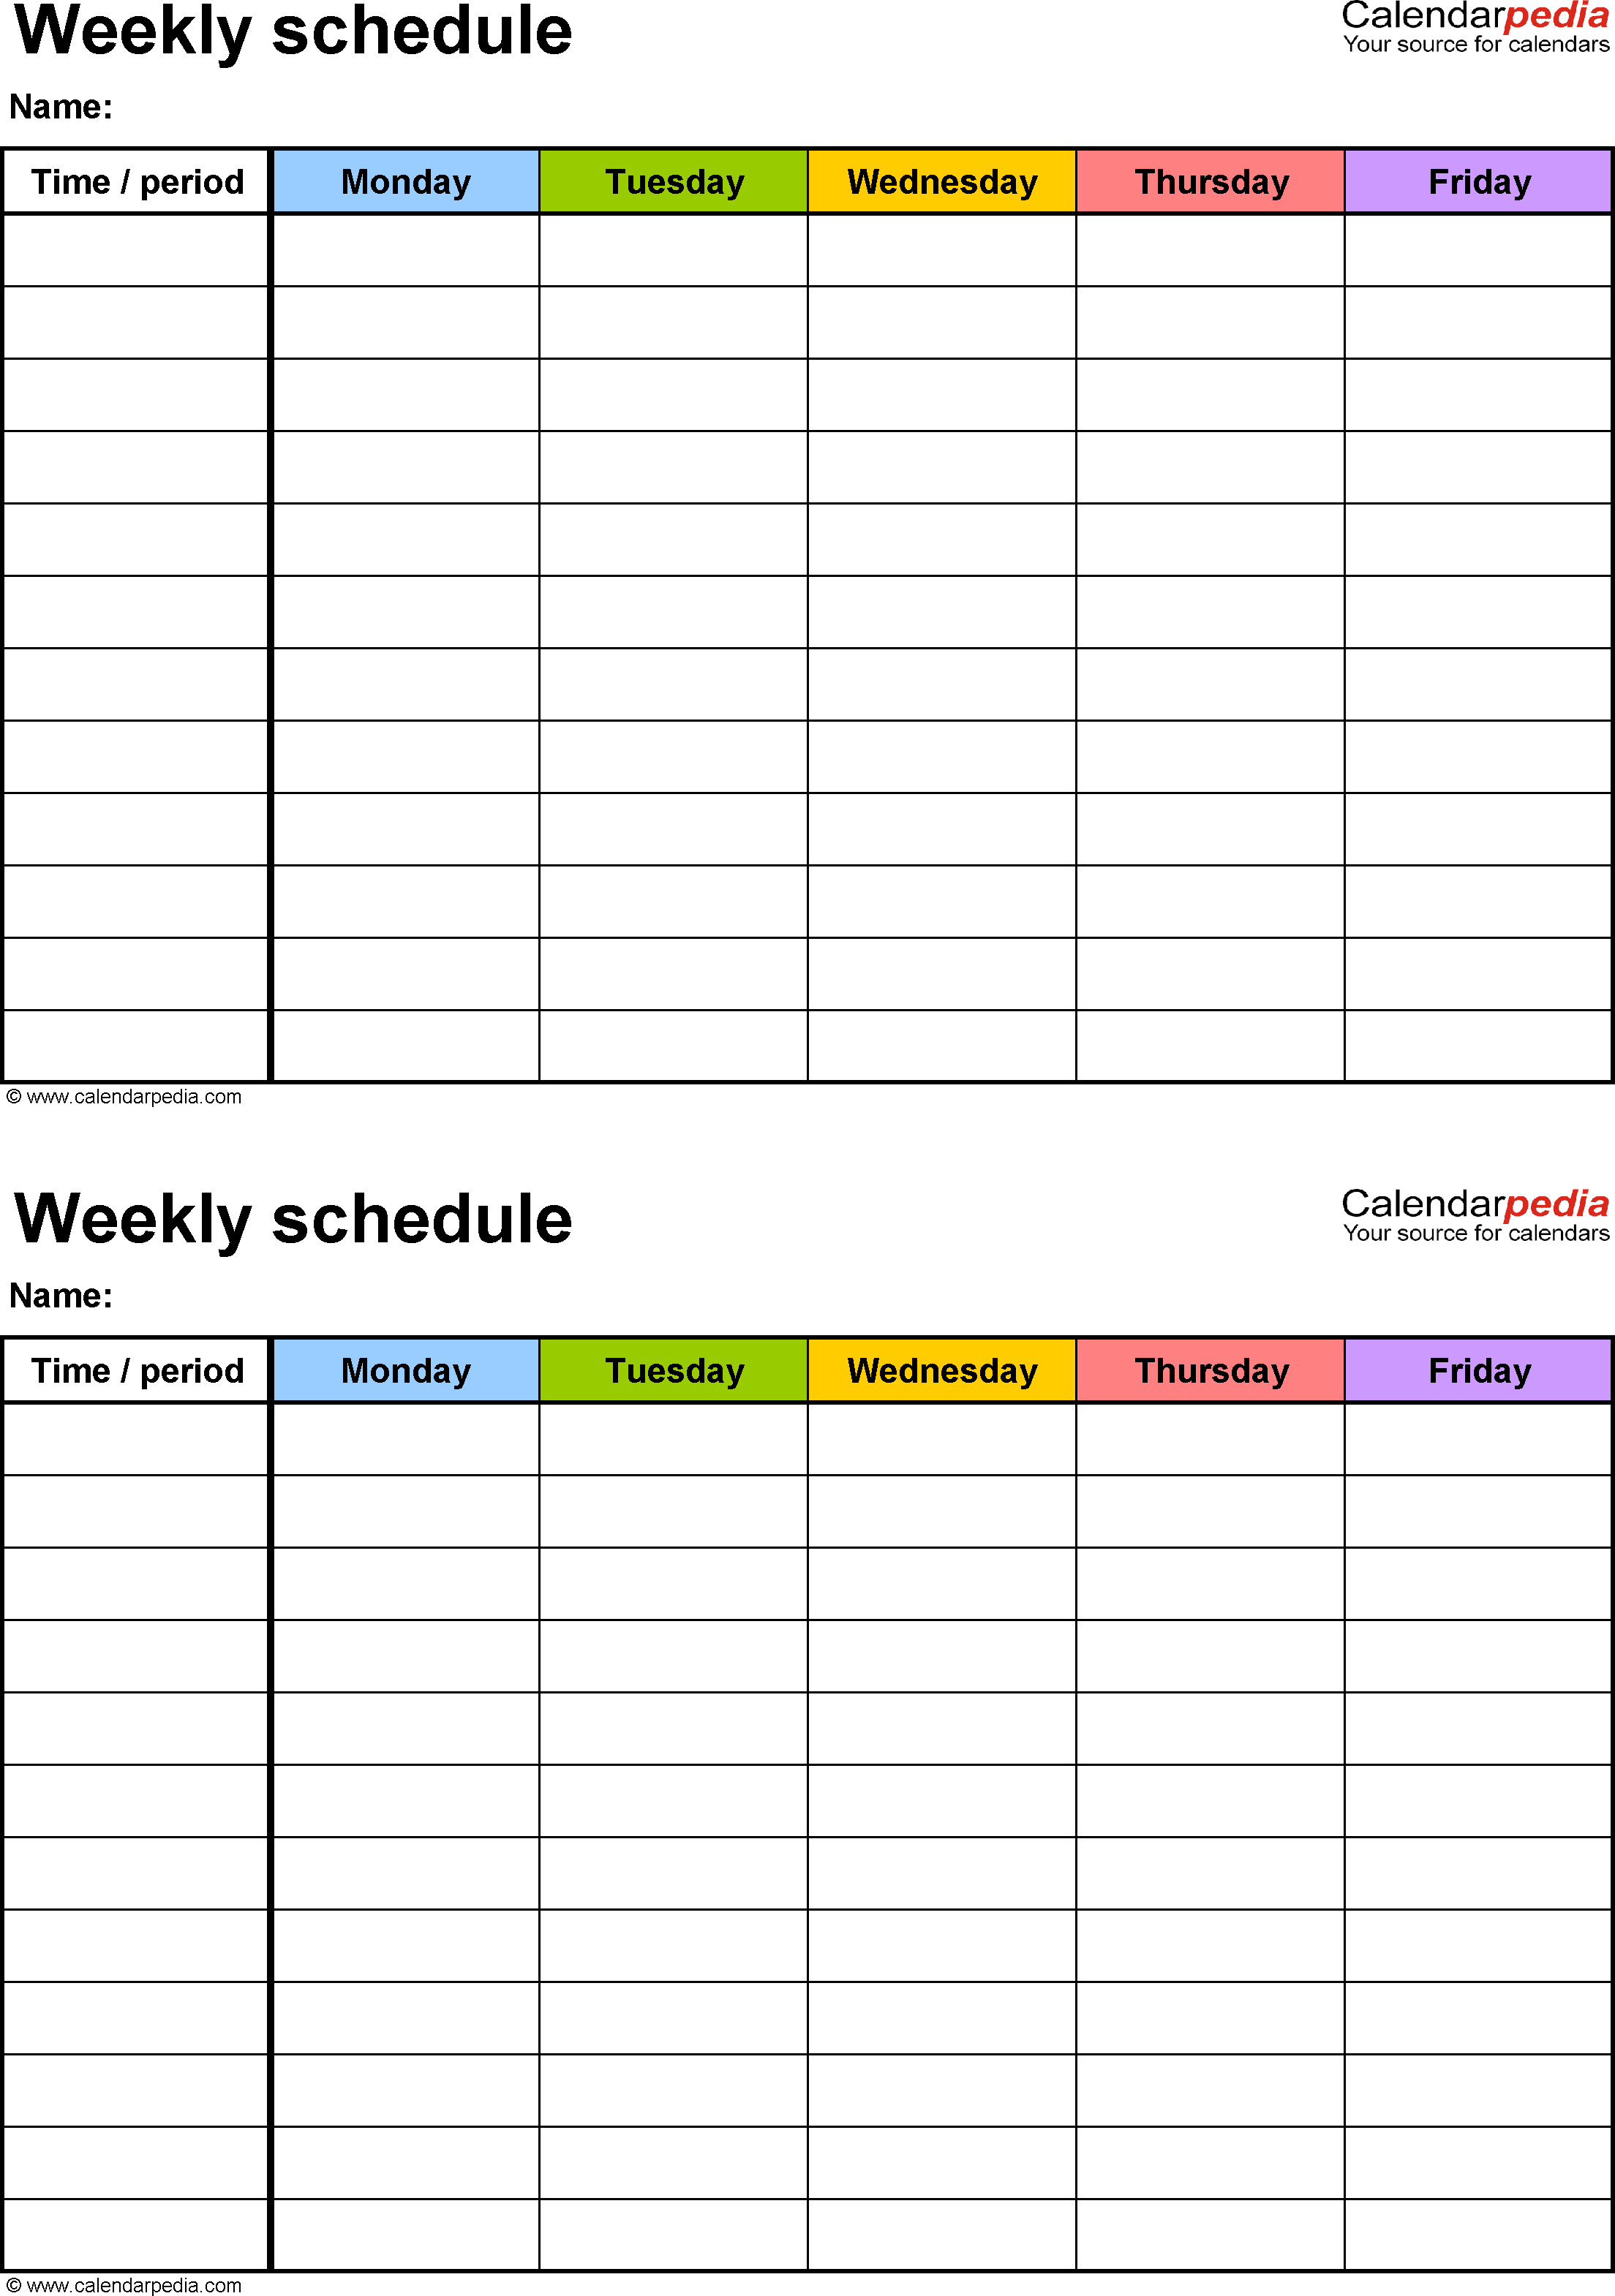 Free Weekly Schedule Templates For Pdf 18 Templates Daily Schedule Template Weekly Calendar Template Class Schedule Template